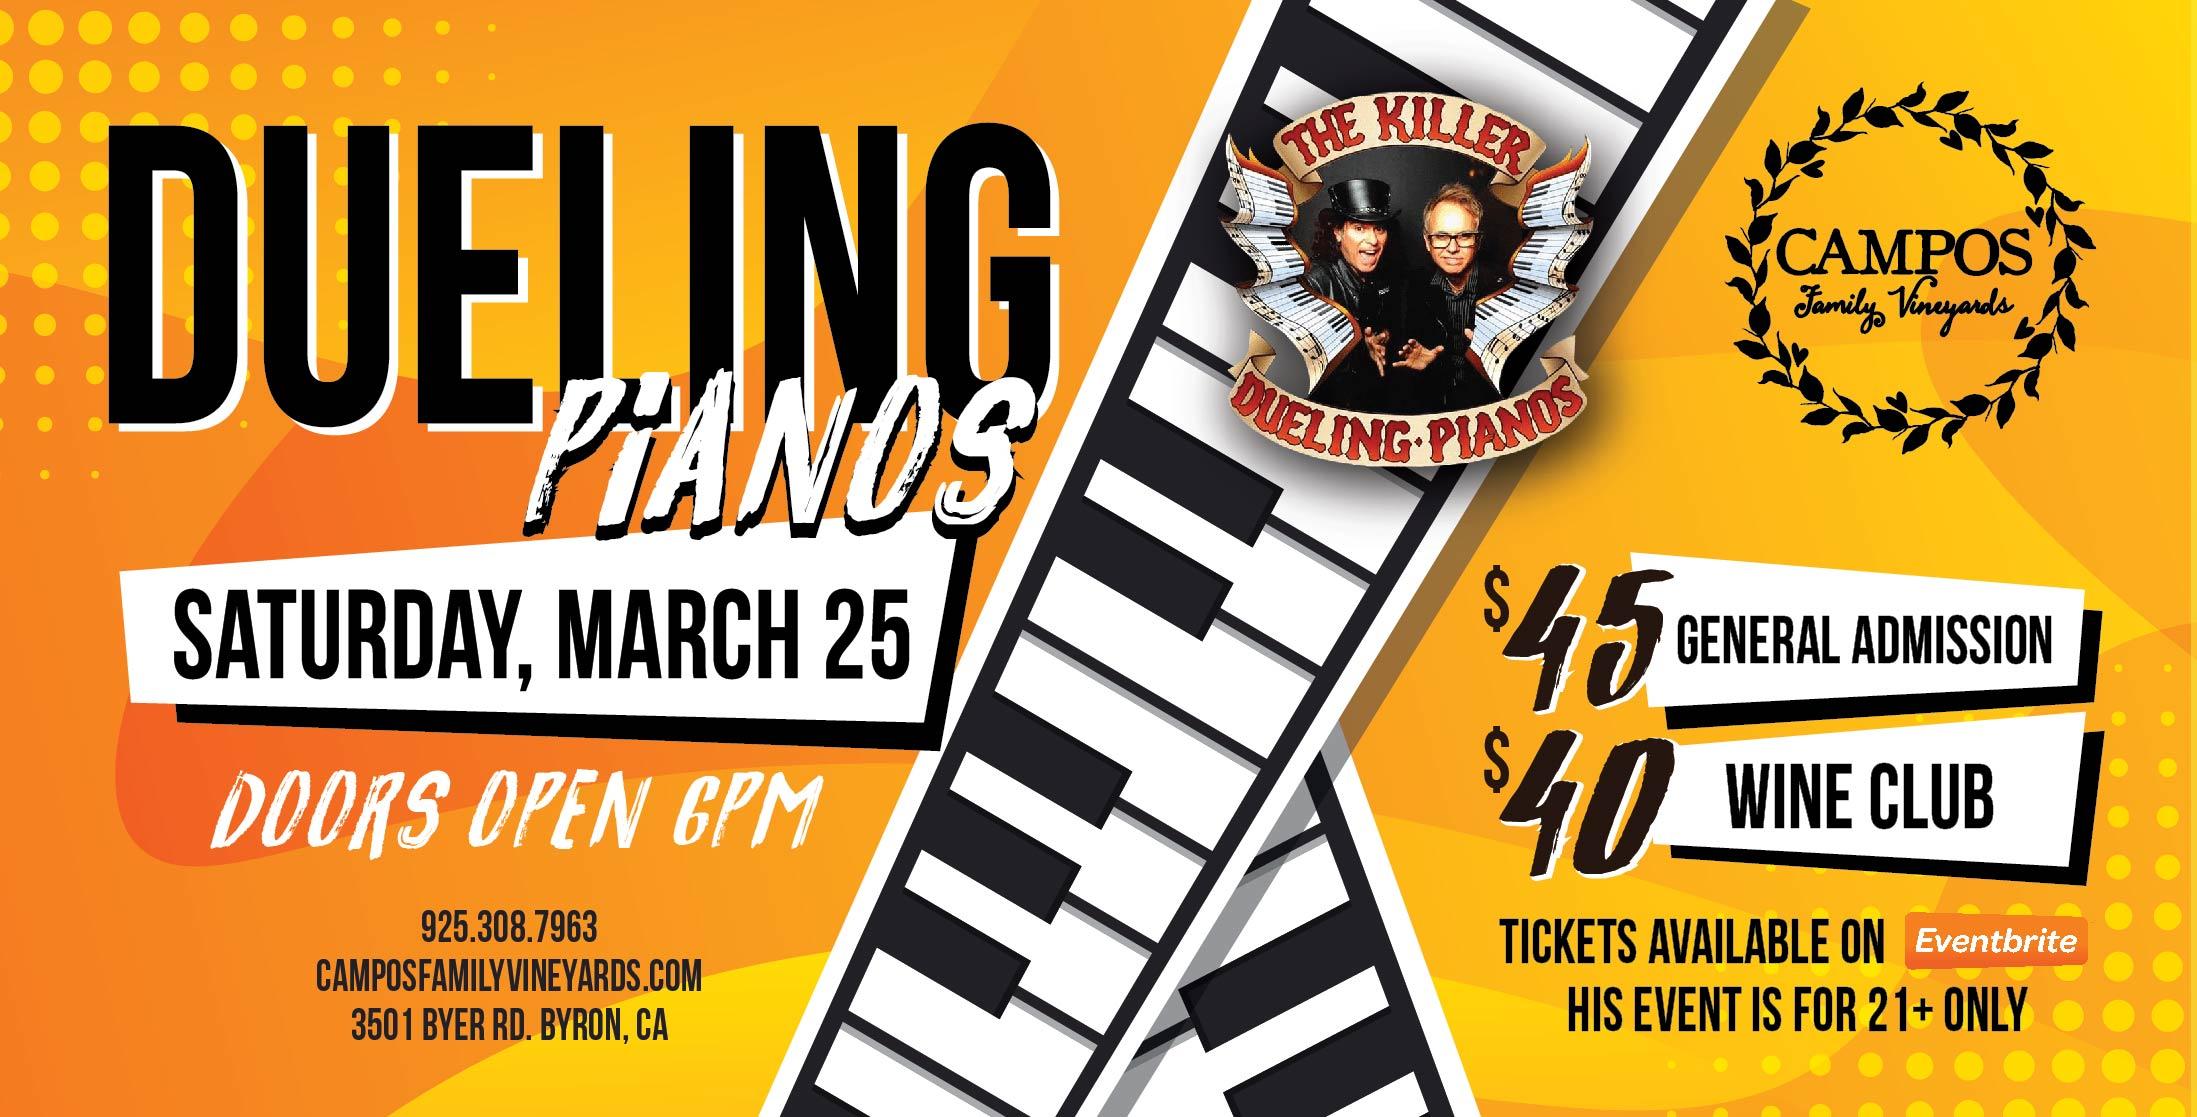 The Killer Dueling Pianos at Campos! SOLD OUT!